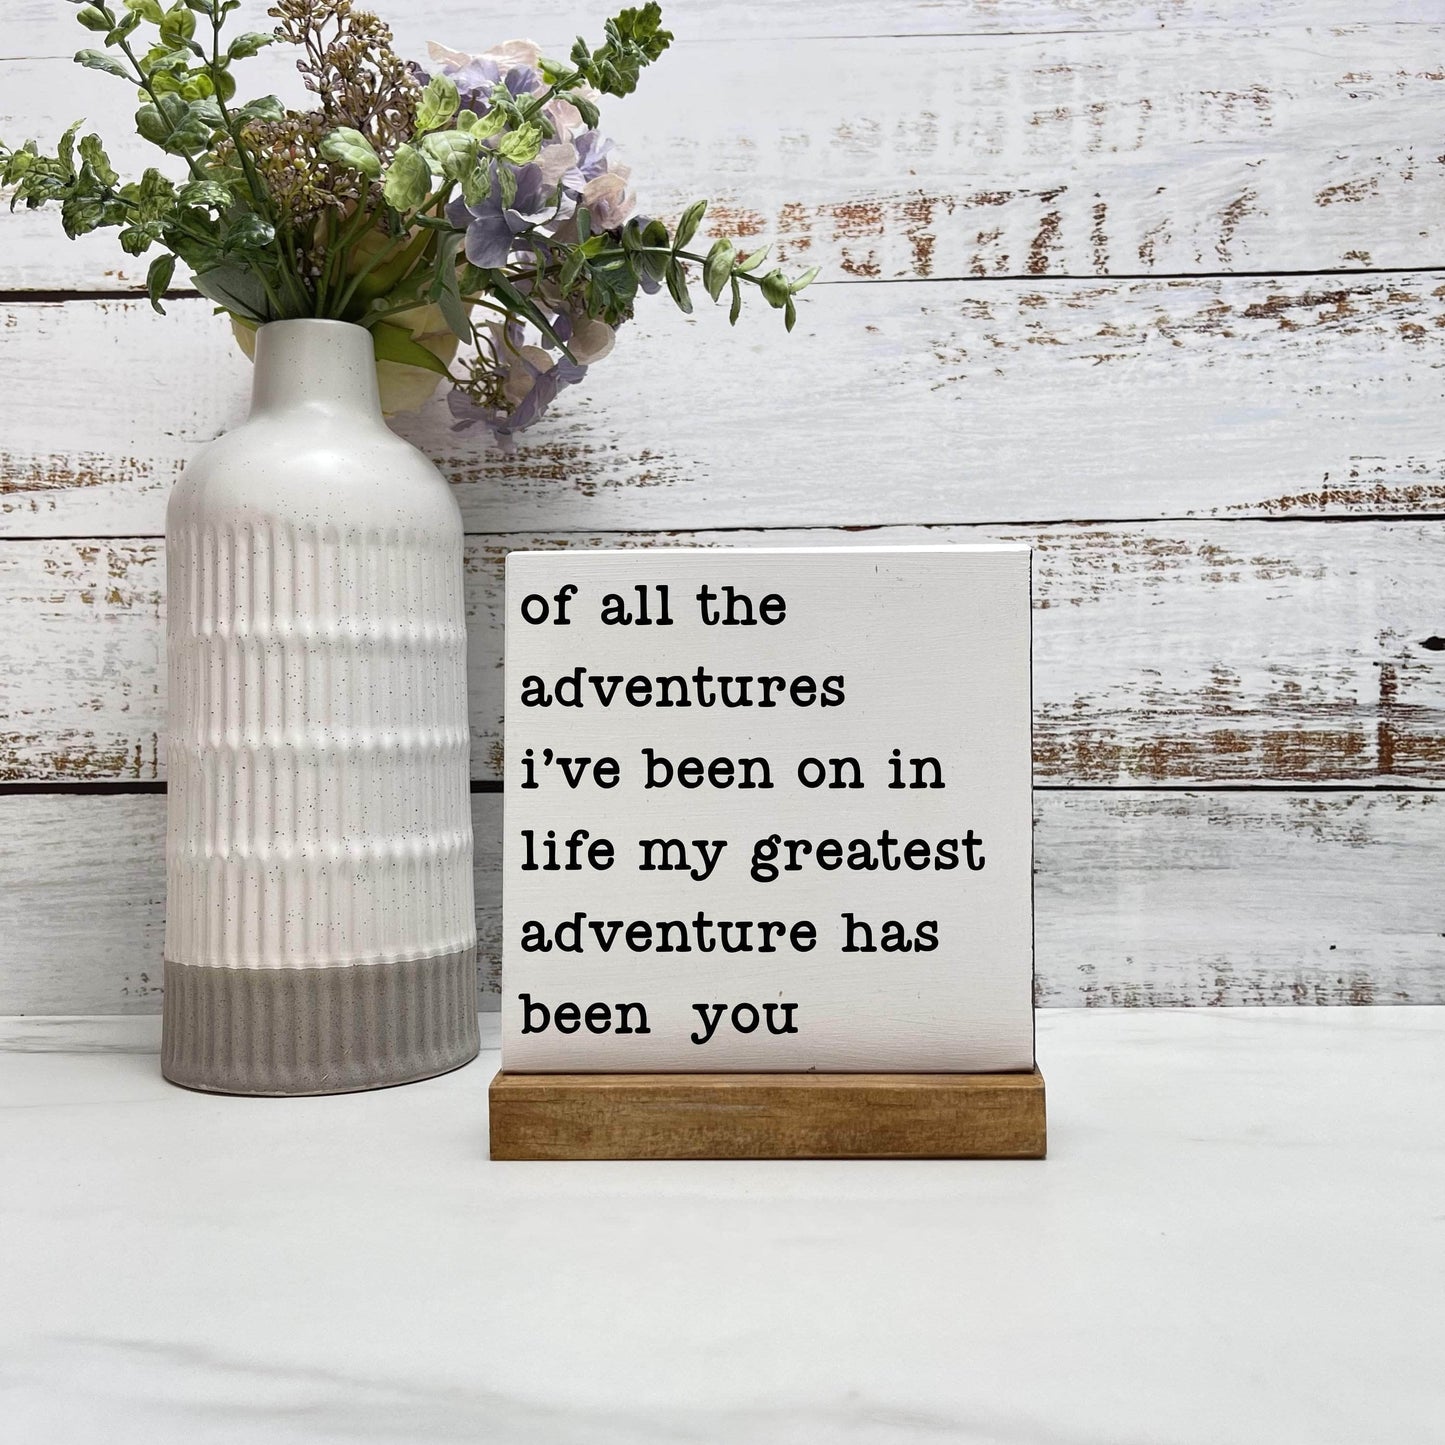 Of all the adventures I've been on wood sign, farmhouse sign, rustic decor, home decor